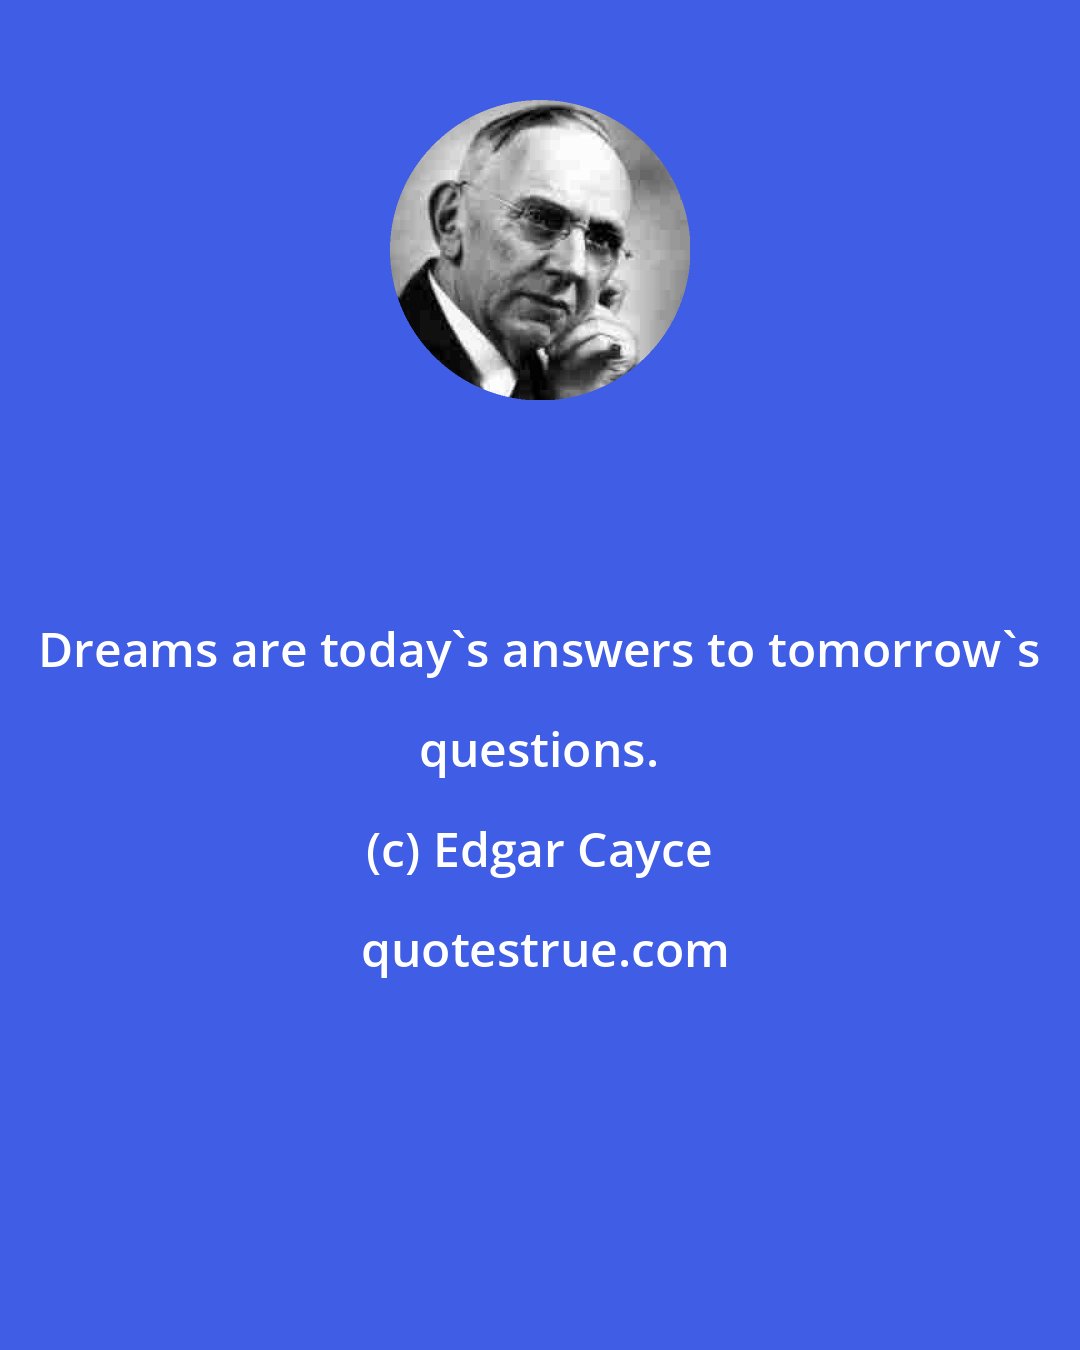 Edgar Cayce: Dreams are today's answers to tomorrow's questions.